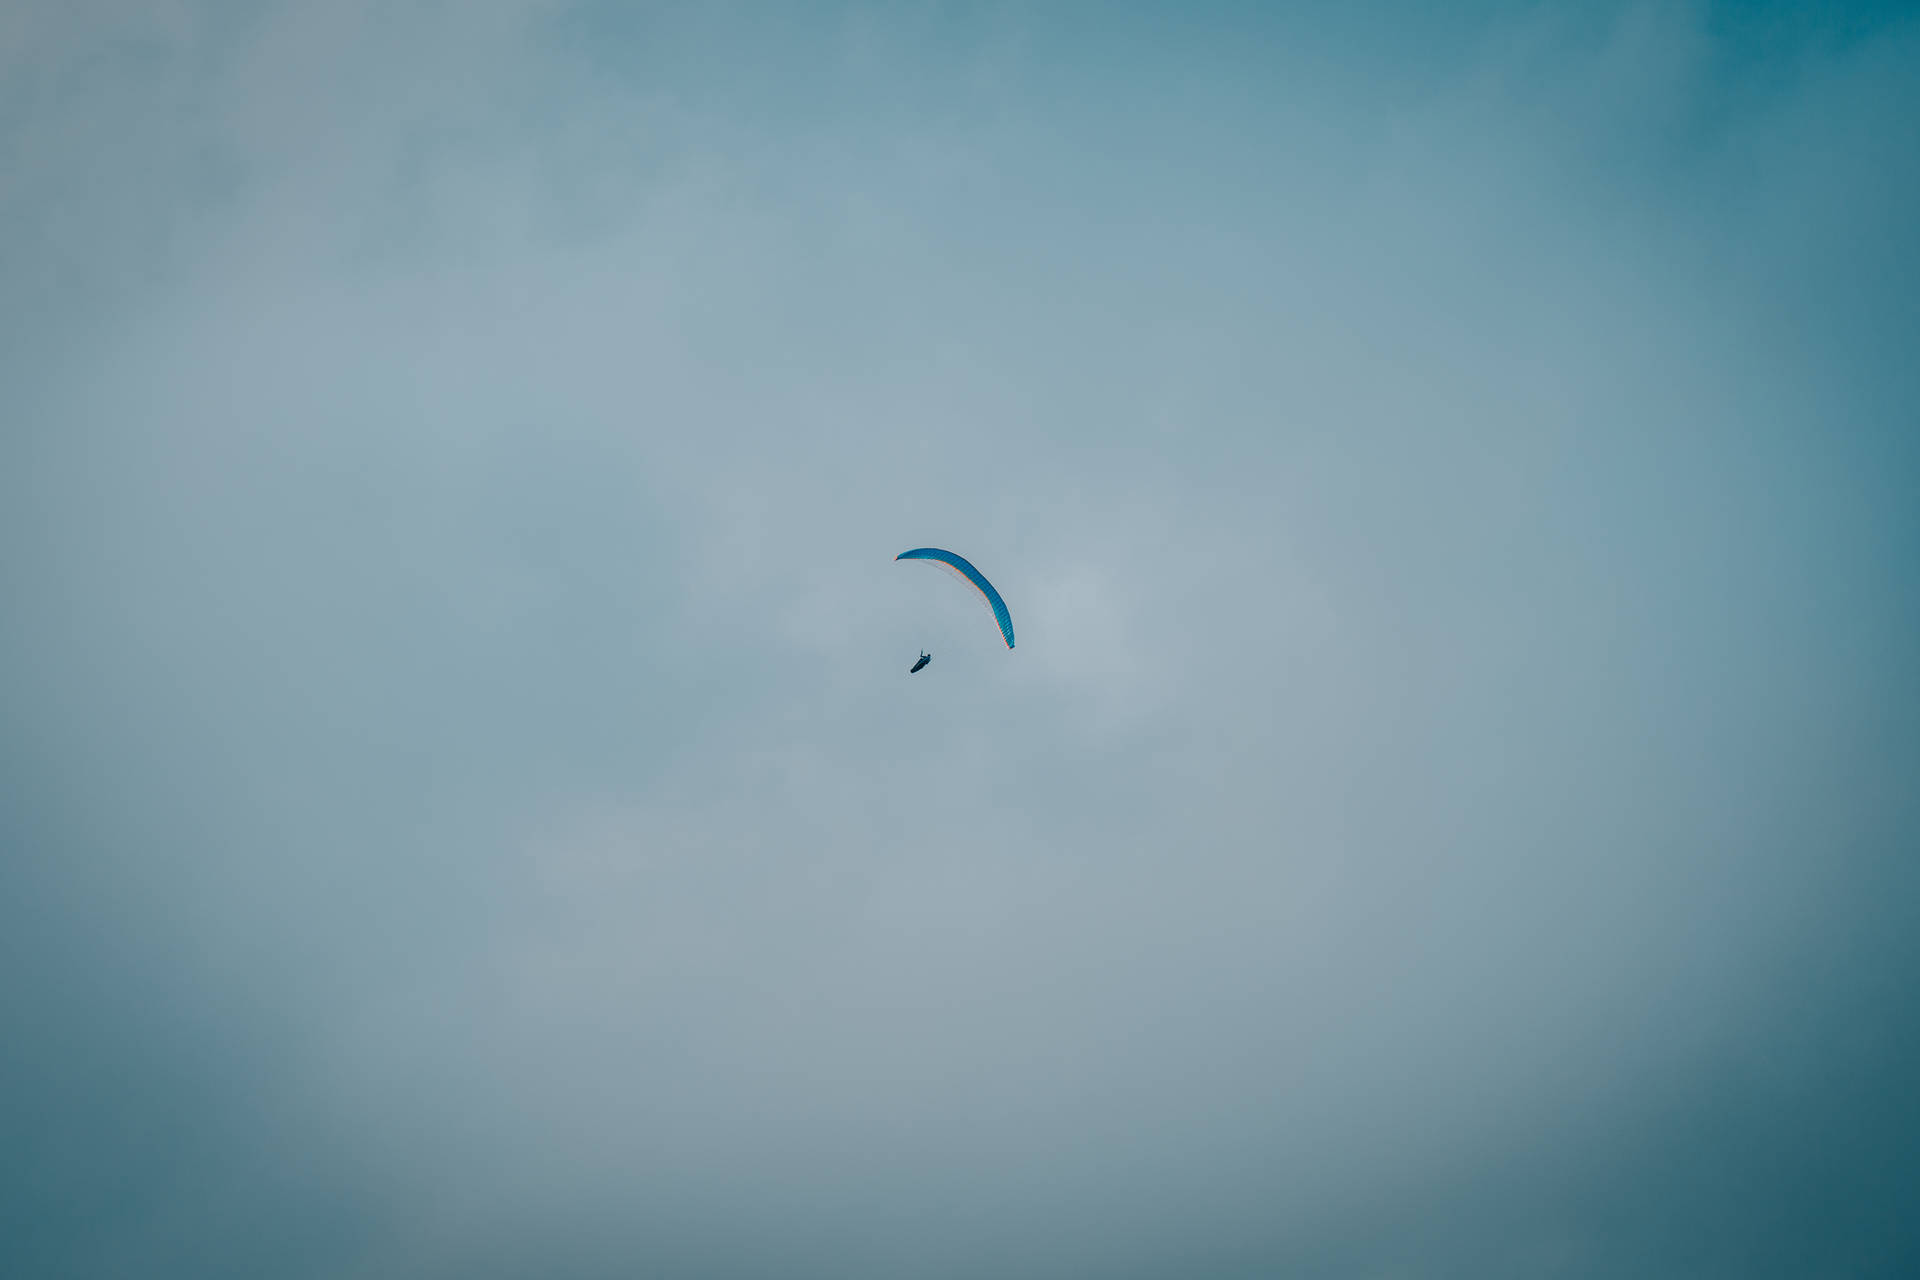 Paragliding To The Right